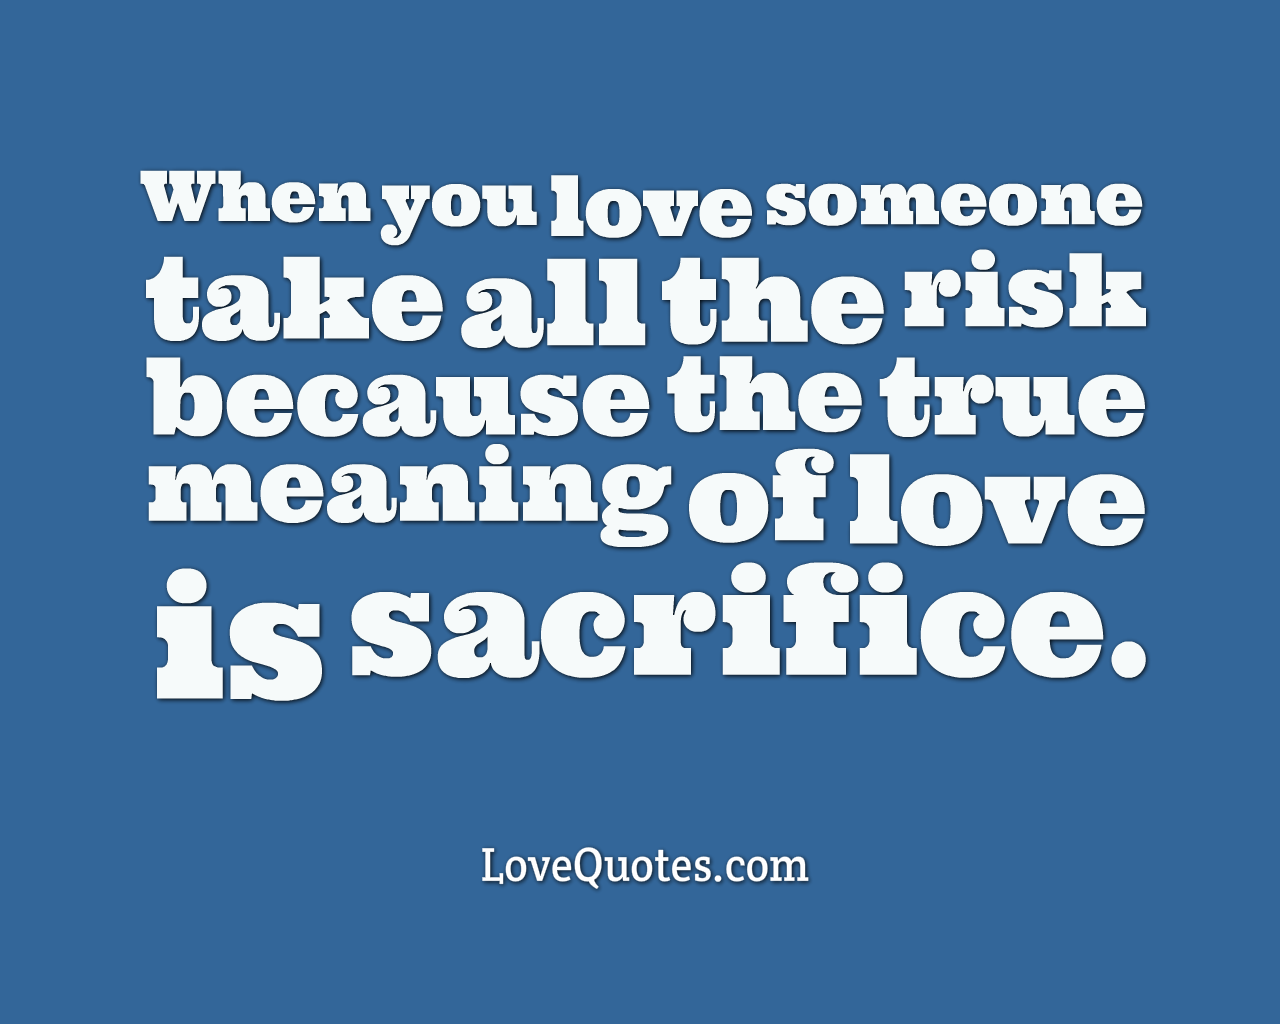 quotes about taking risks in love